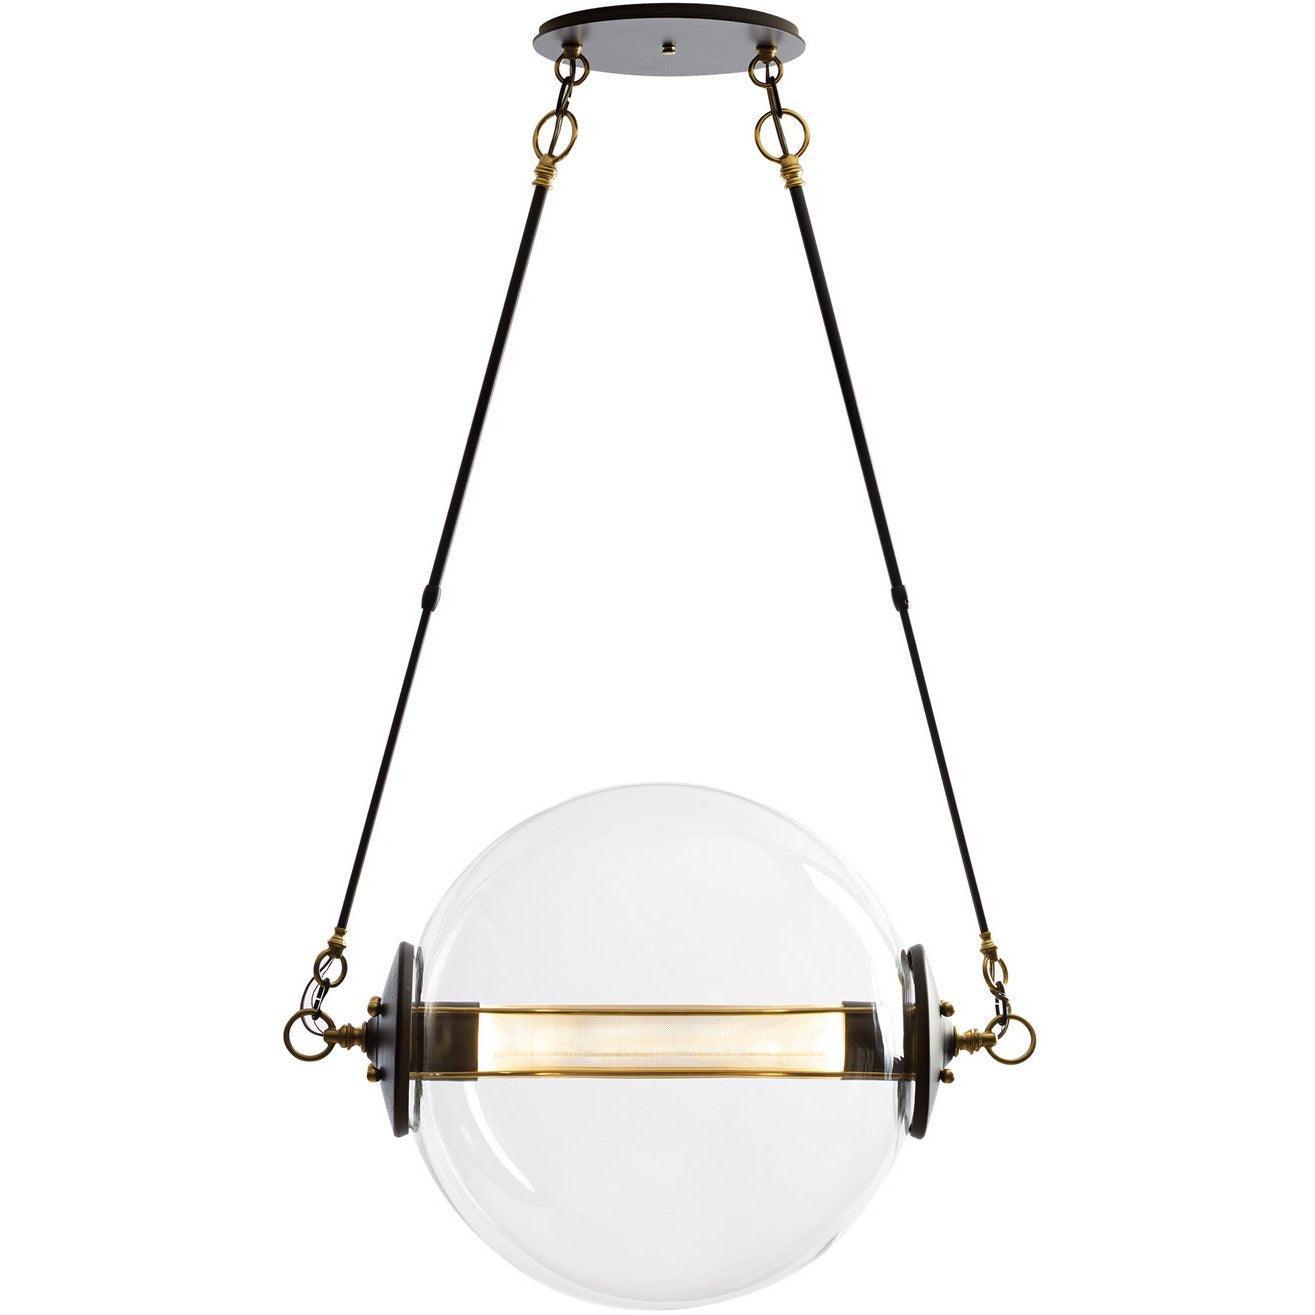 Montreal Lighting & Hardware - Otto 28-Inch Two Light Pendant by Hubbardton Forge | Open Box - 134405-SKT-LONG-31-ZK-OB | Montreal Lighting & Hardware